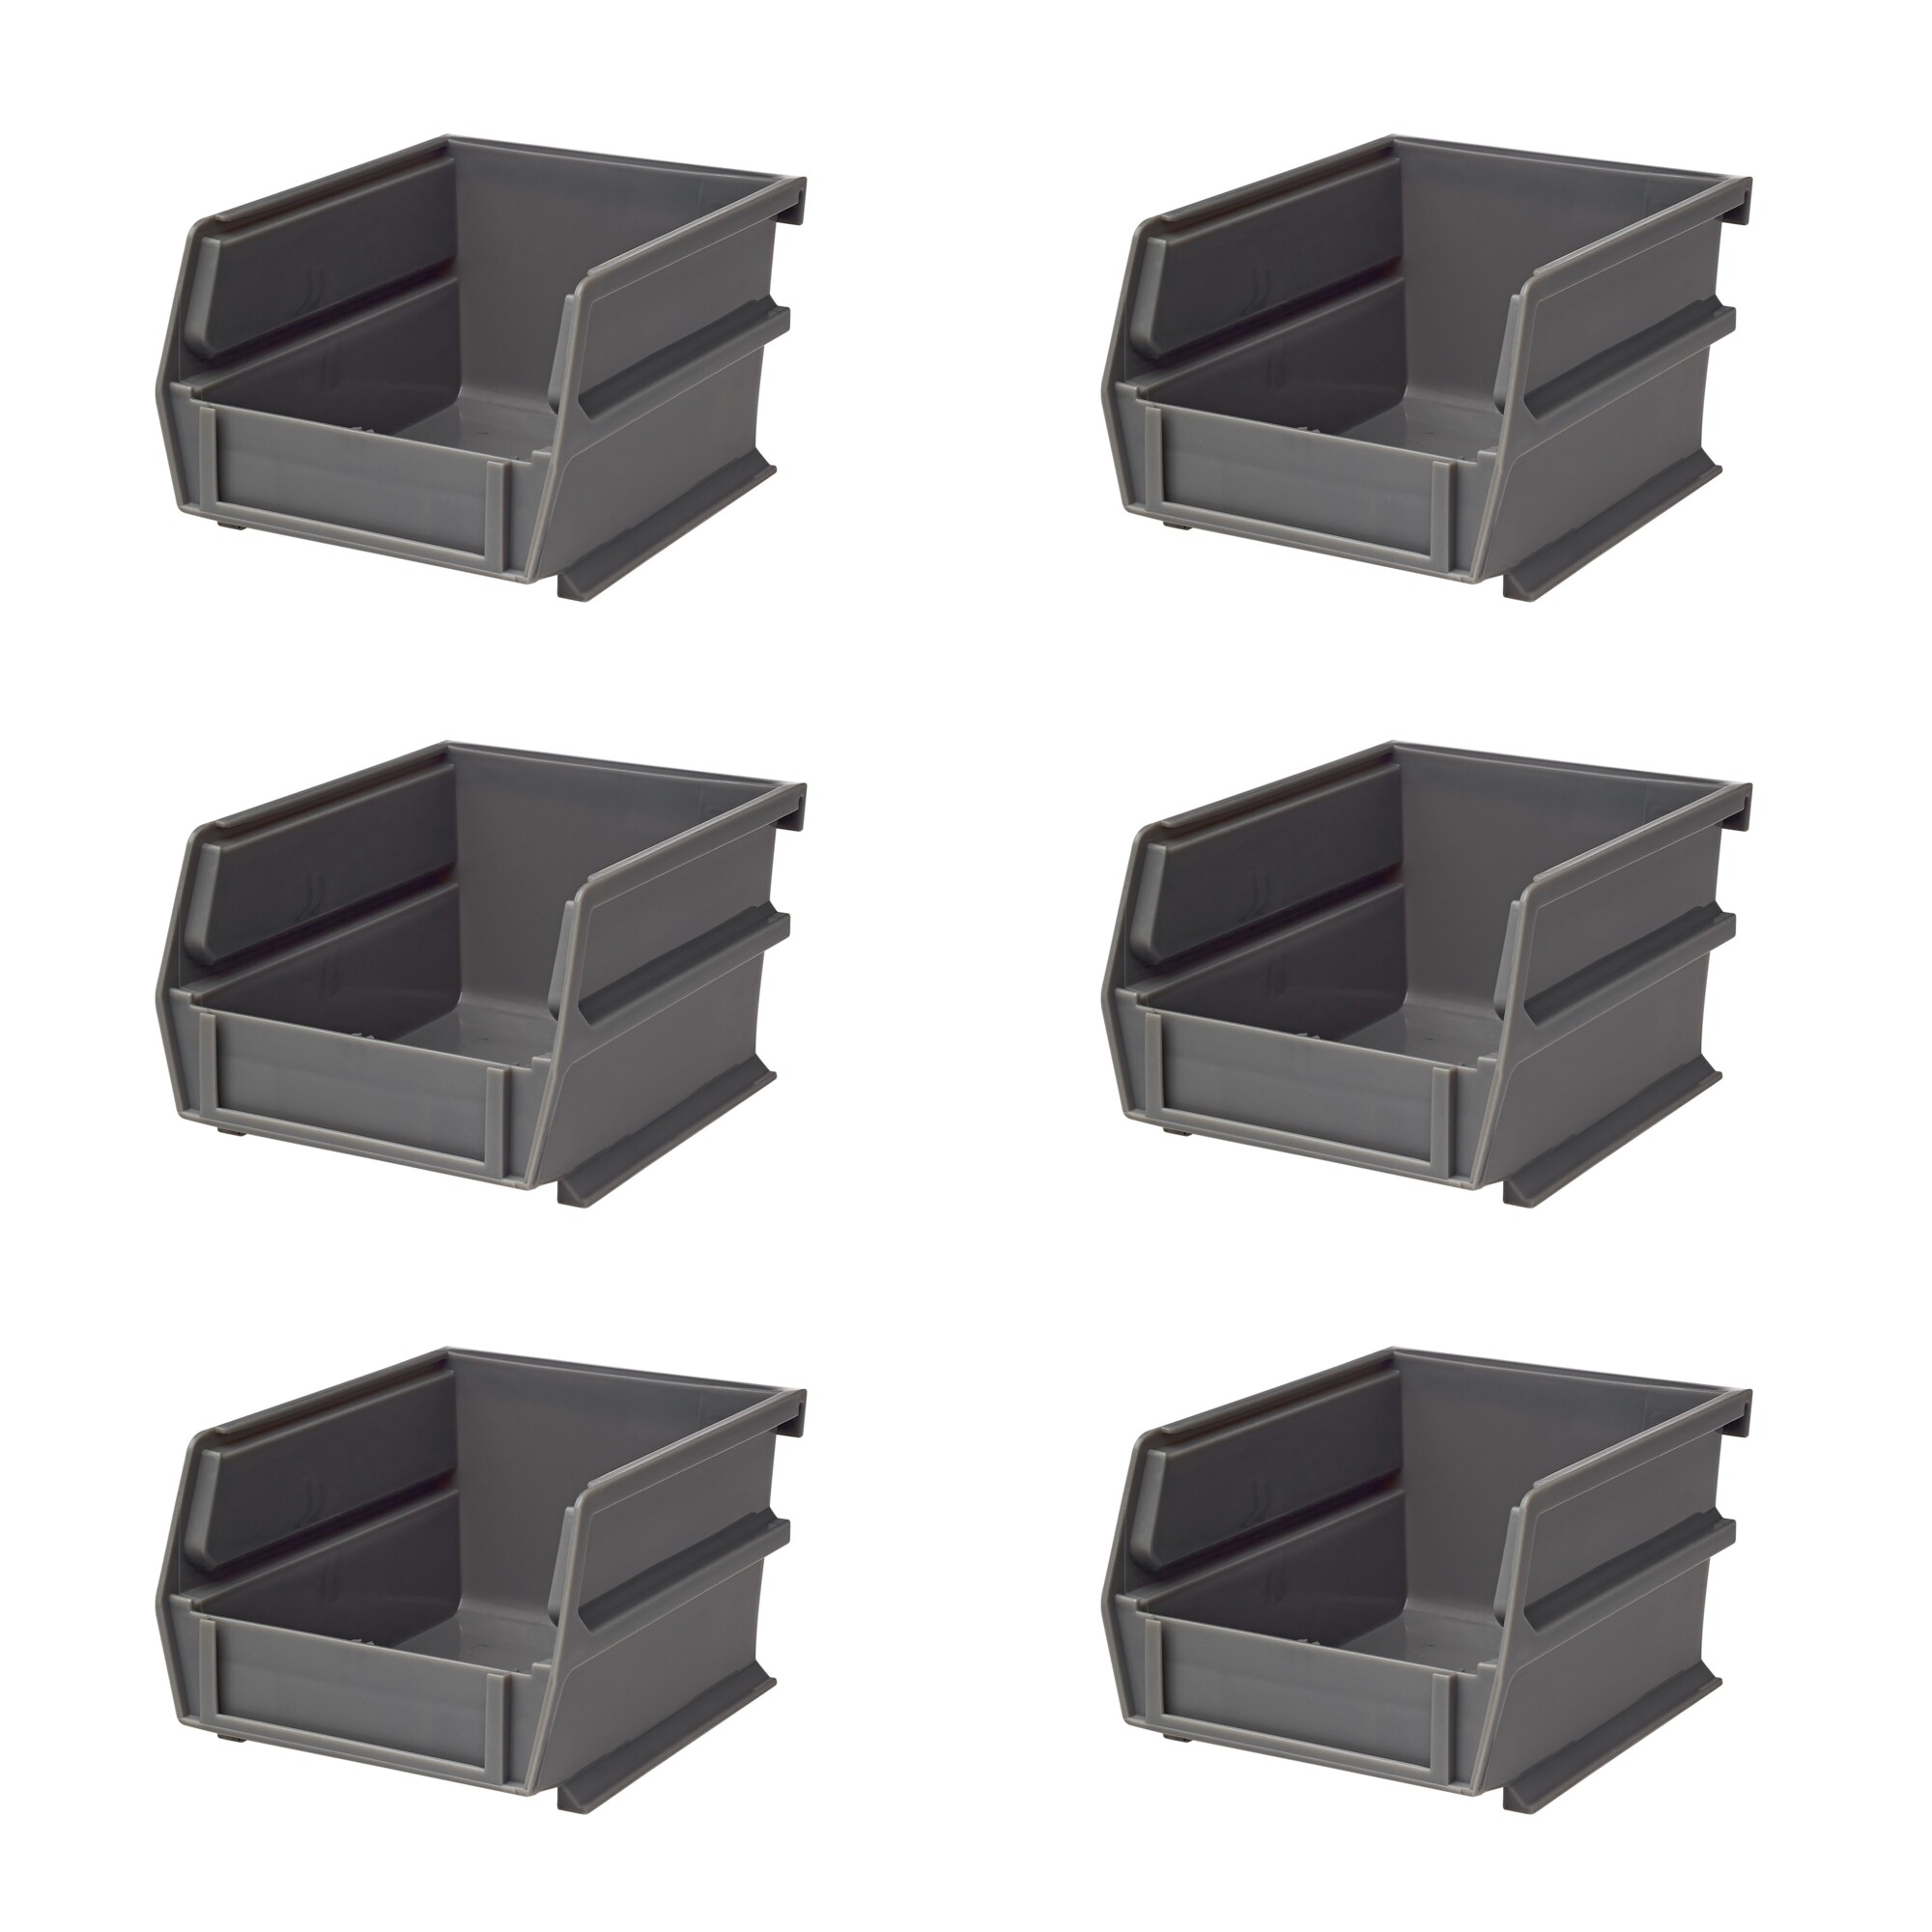 Triton Products, LocBin Hanging and interlocking Bins, Height 3 in, Width 4.125 in, Bins Included (qty.) 6, Model 3-210GR-6